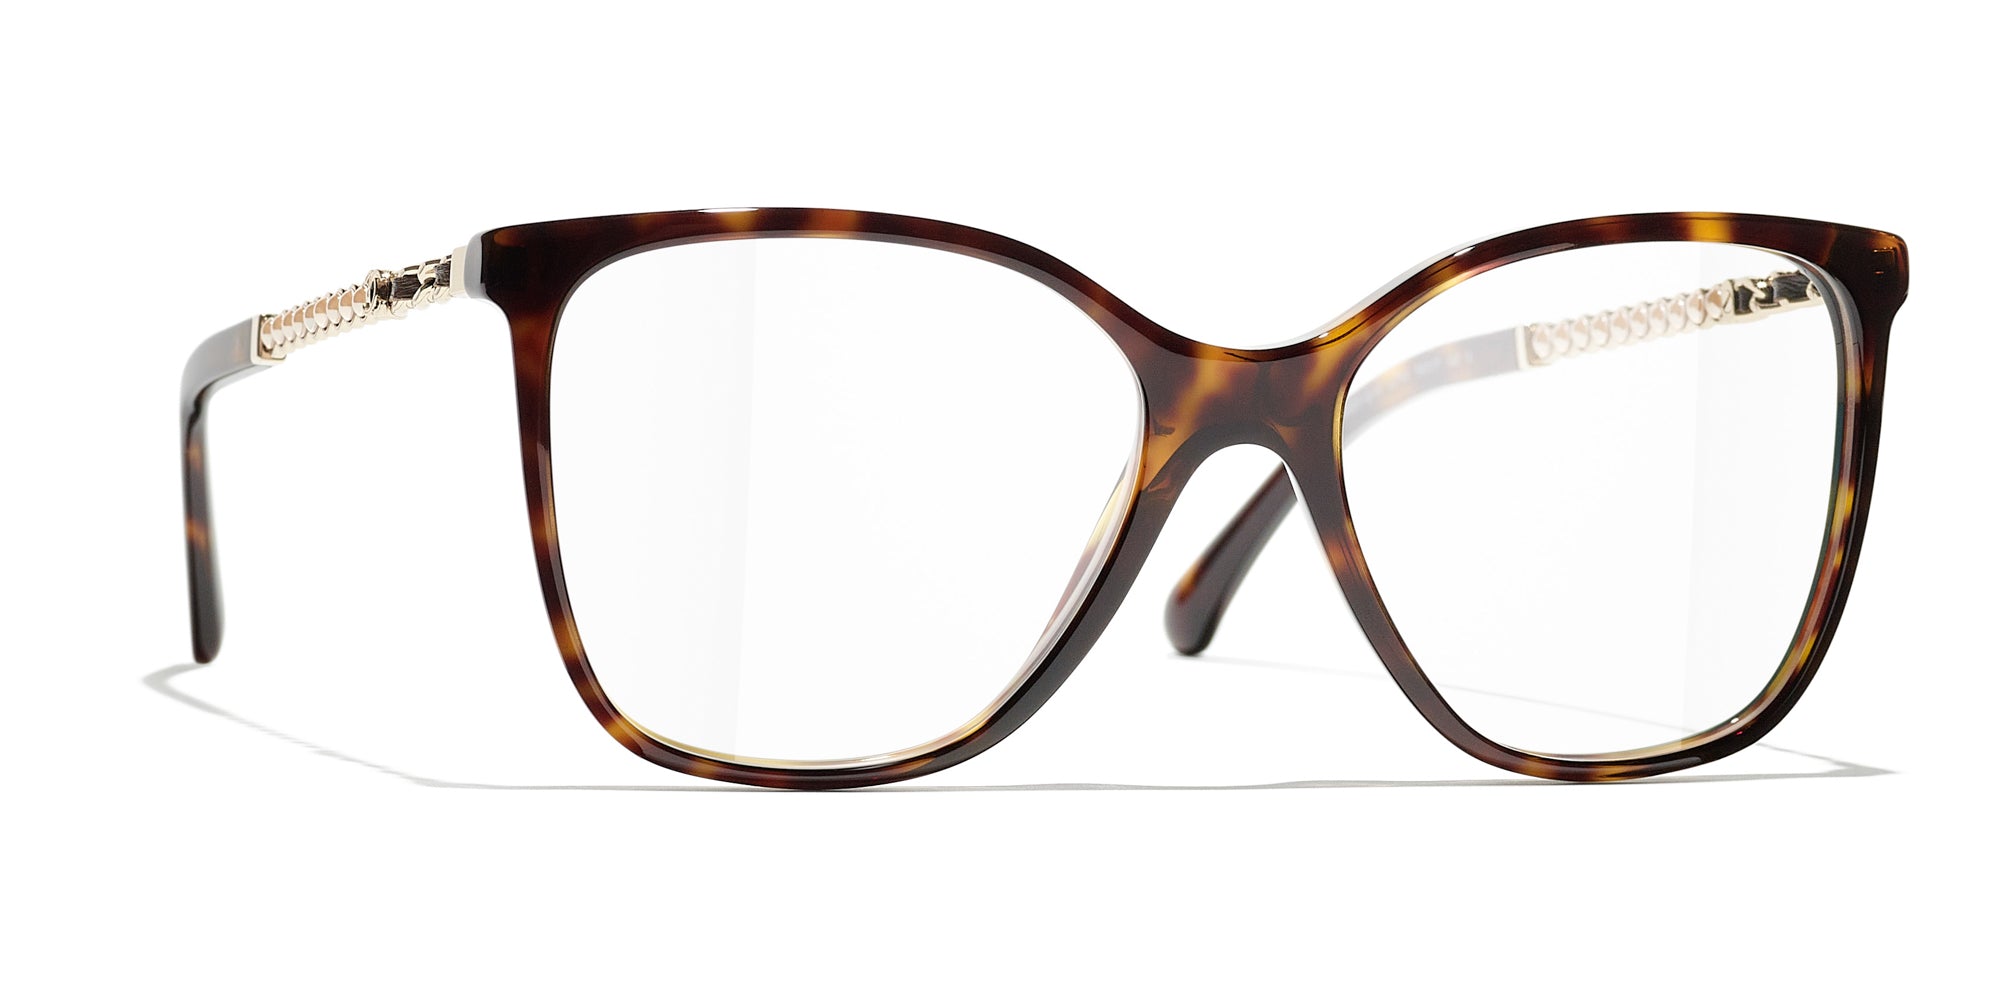 Chanel Square Eyeglasses in Brown